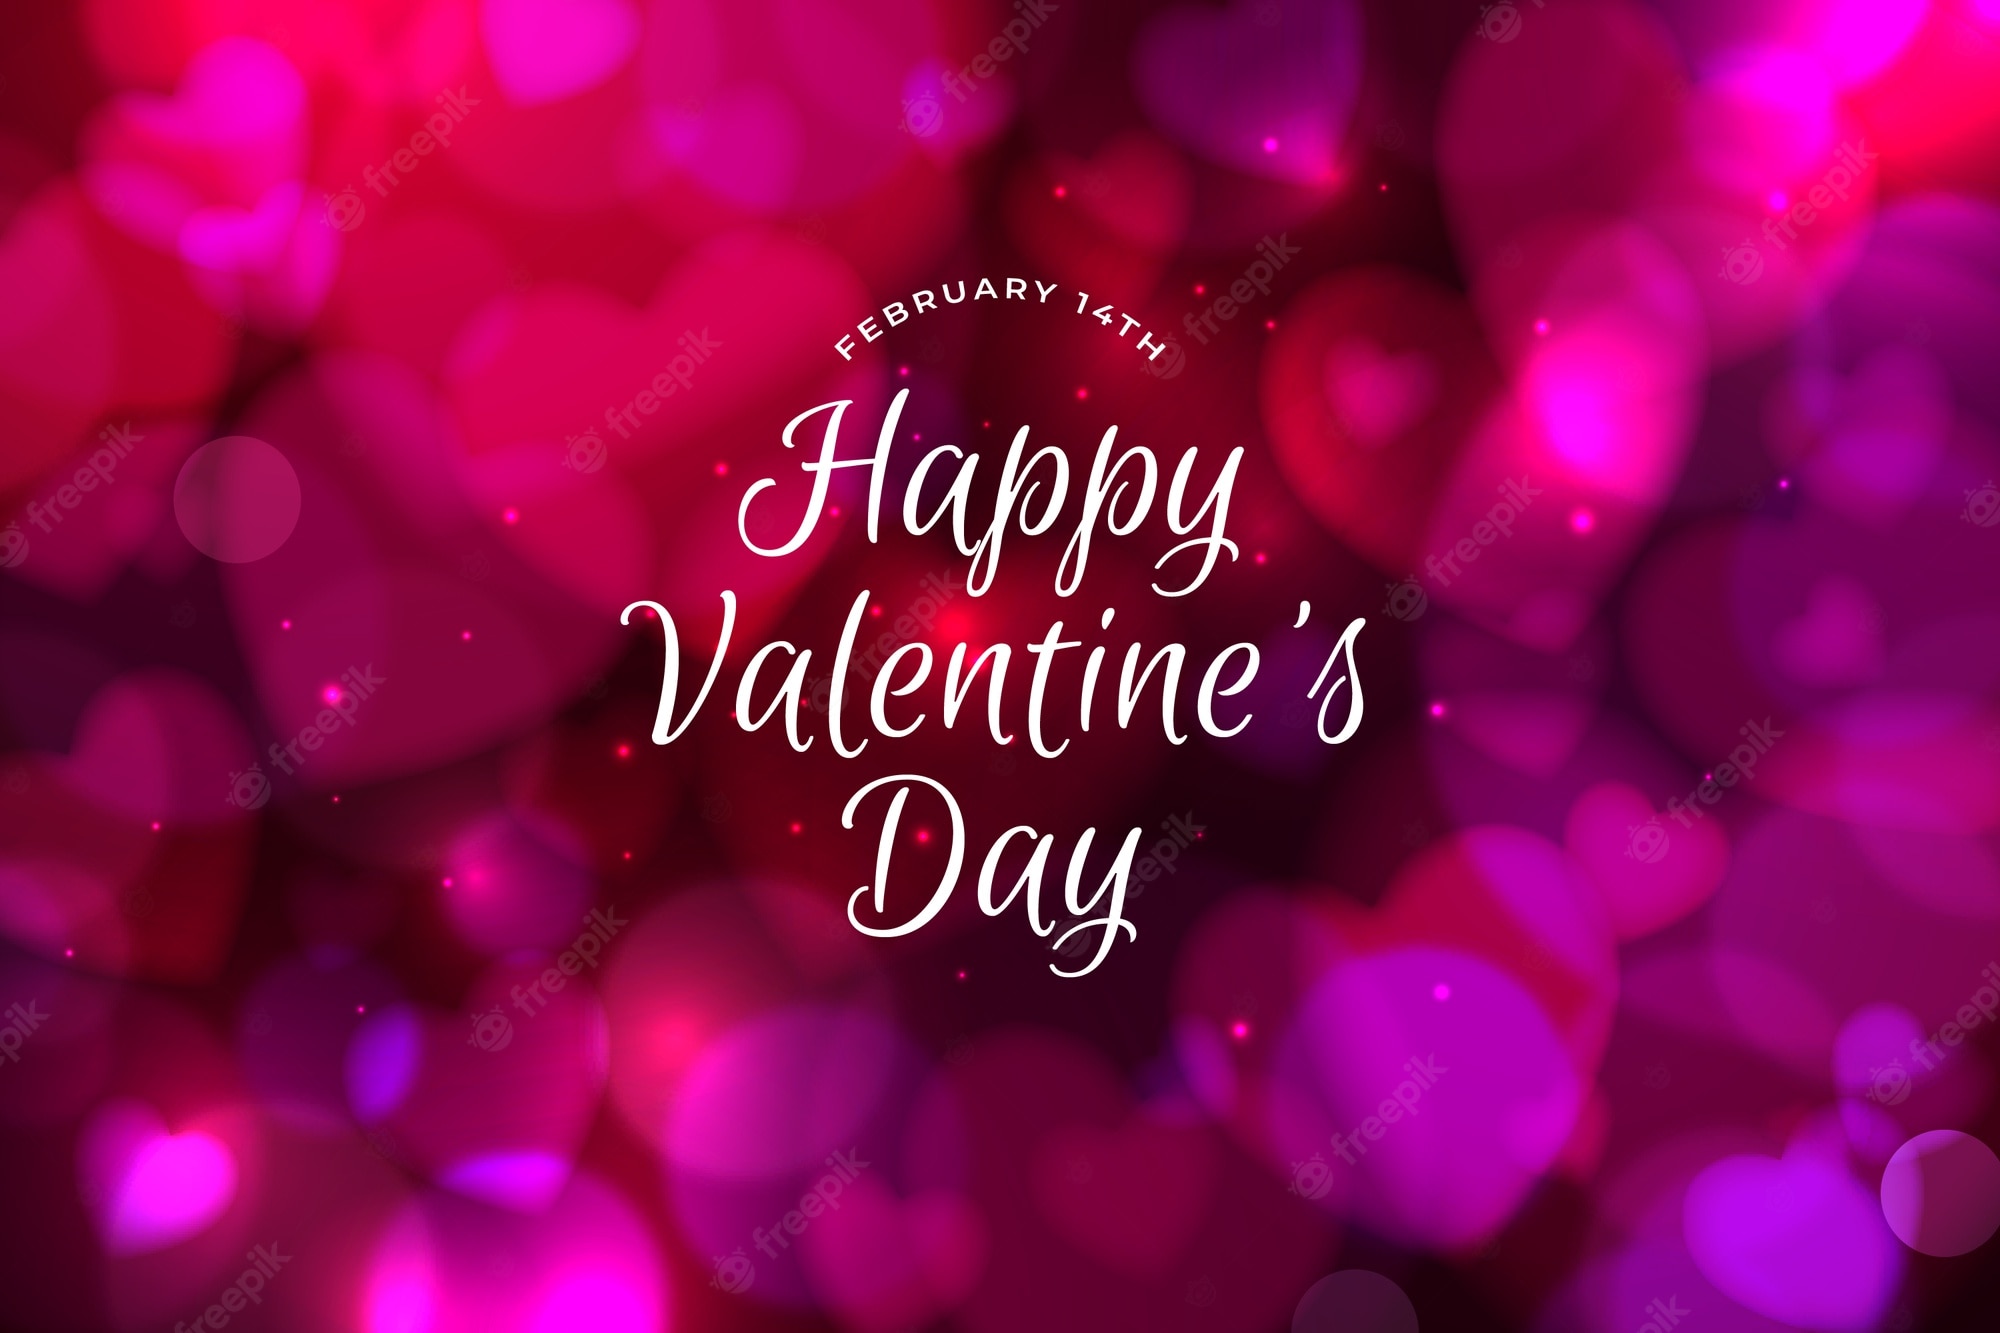 Happy Valentine Day instagram card in 2019 graphic trend, color